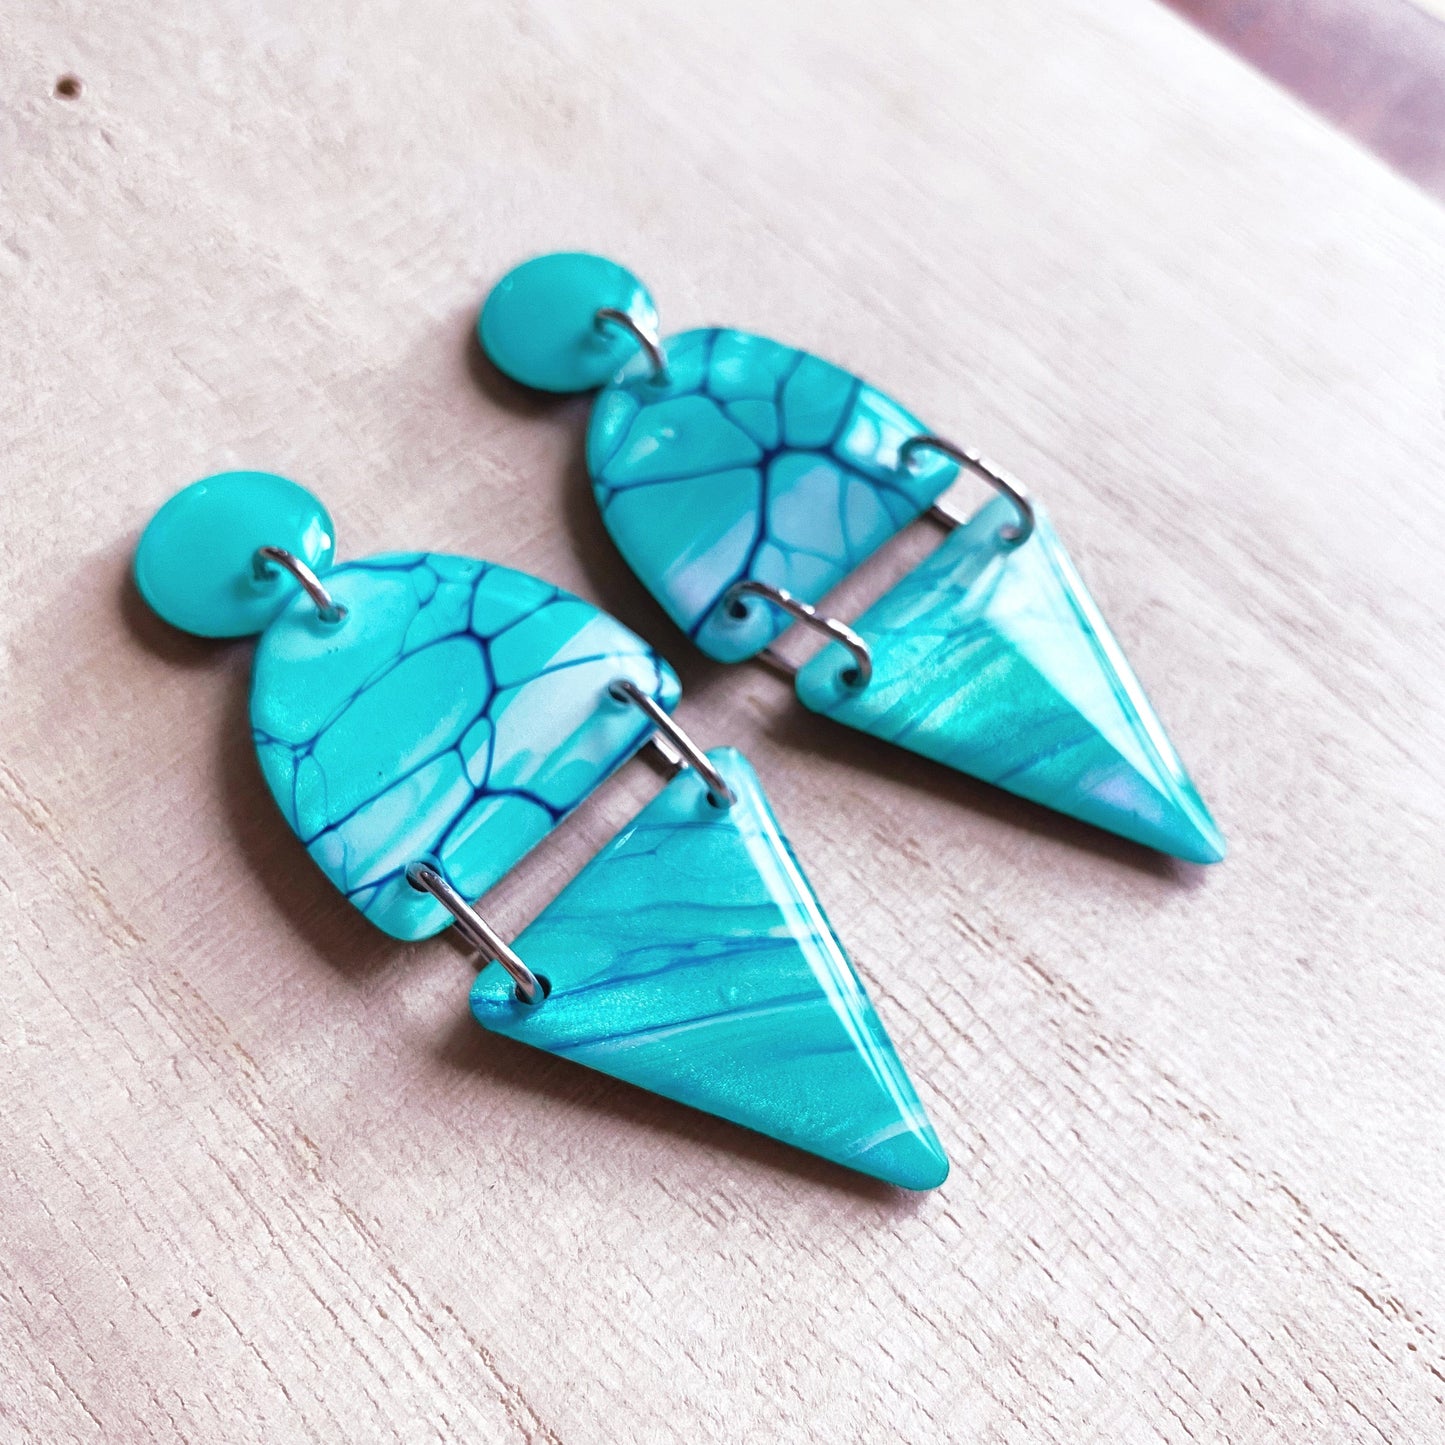 Lacroz Creations Earrings Turquoise Triangle Arch Dangle Earrings